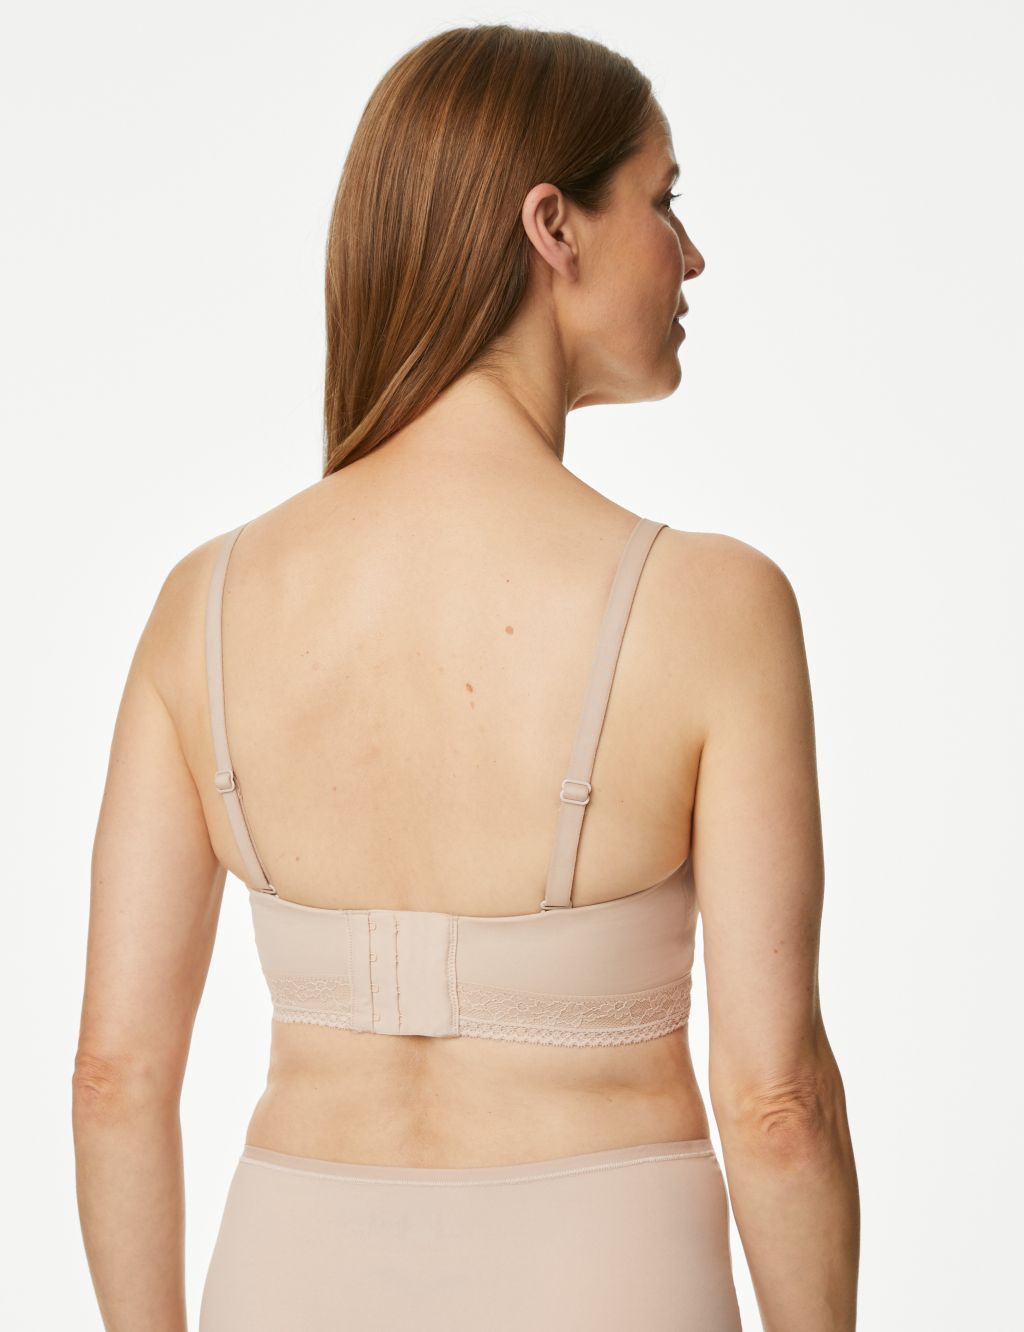 Flexiwired Post Surgery Strapless Bra A-D image 3